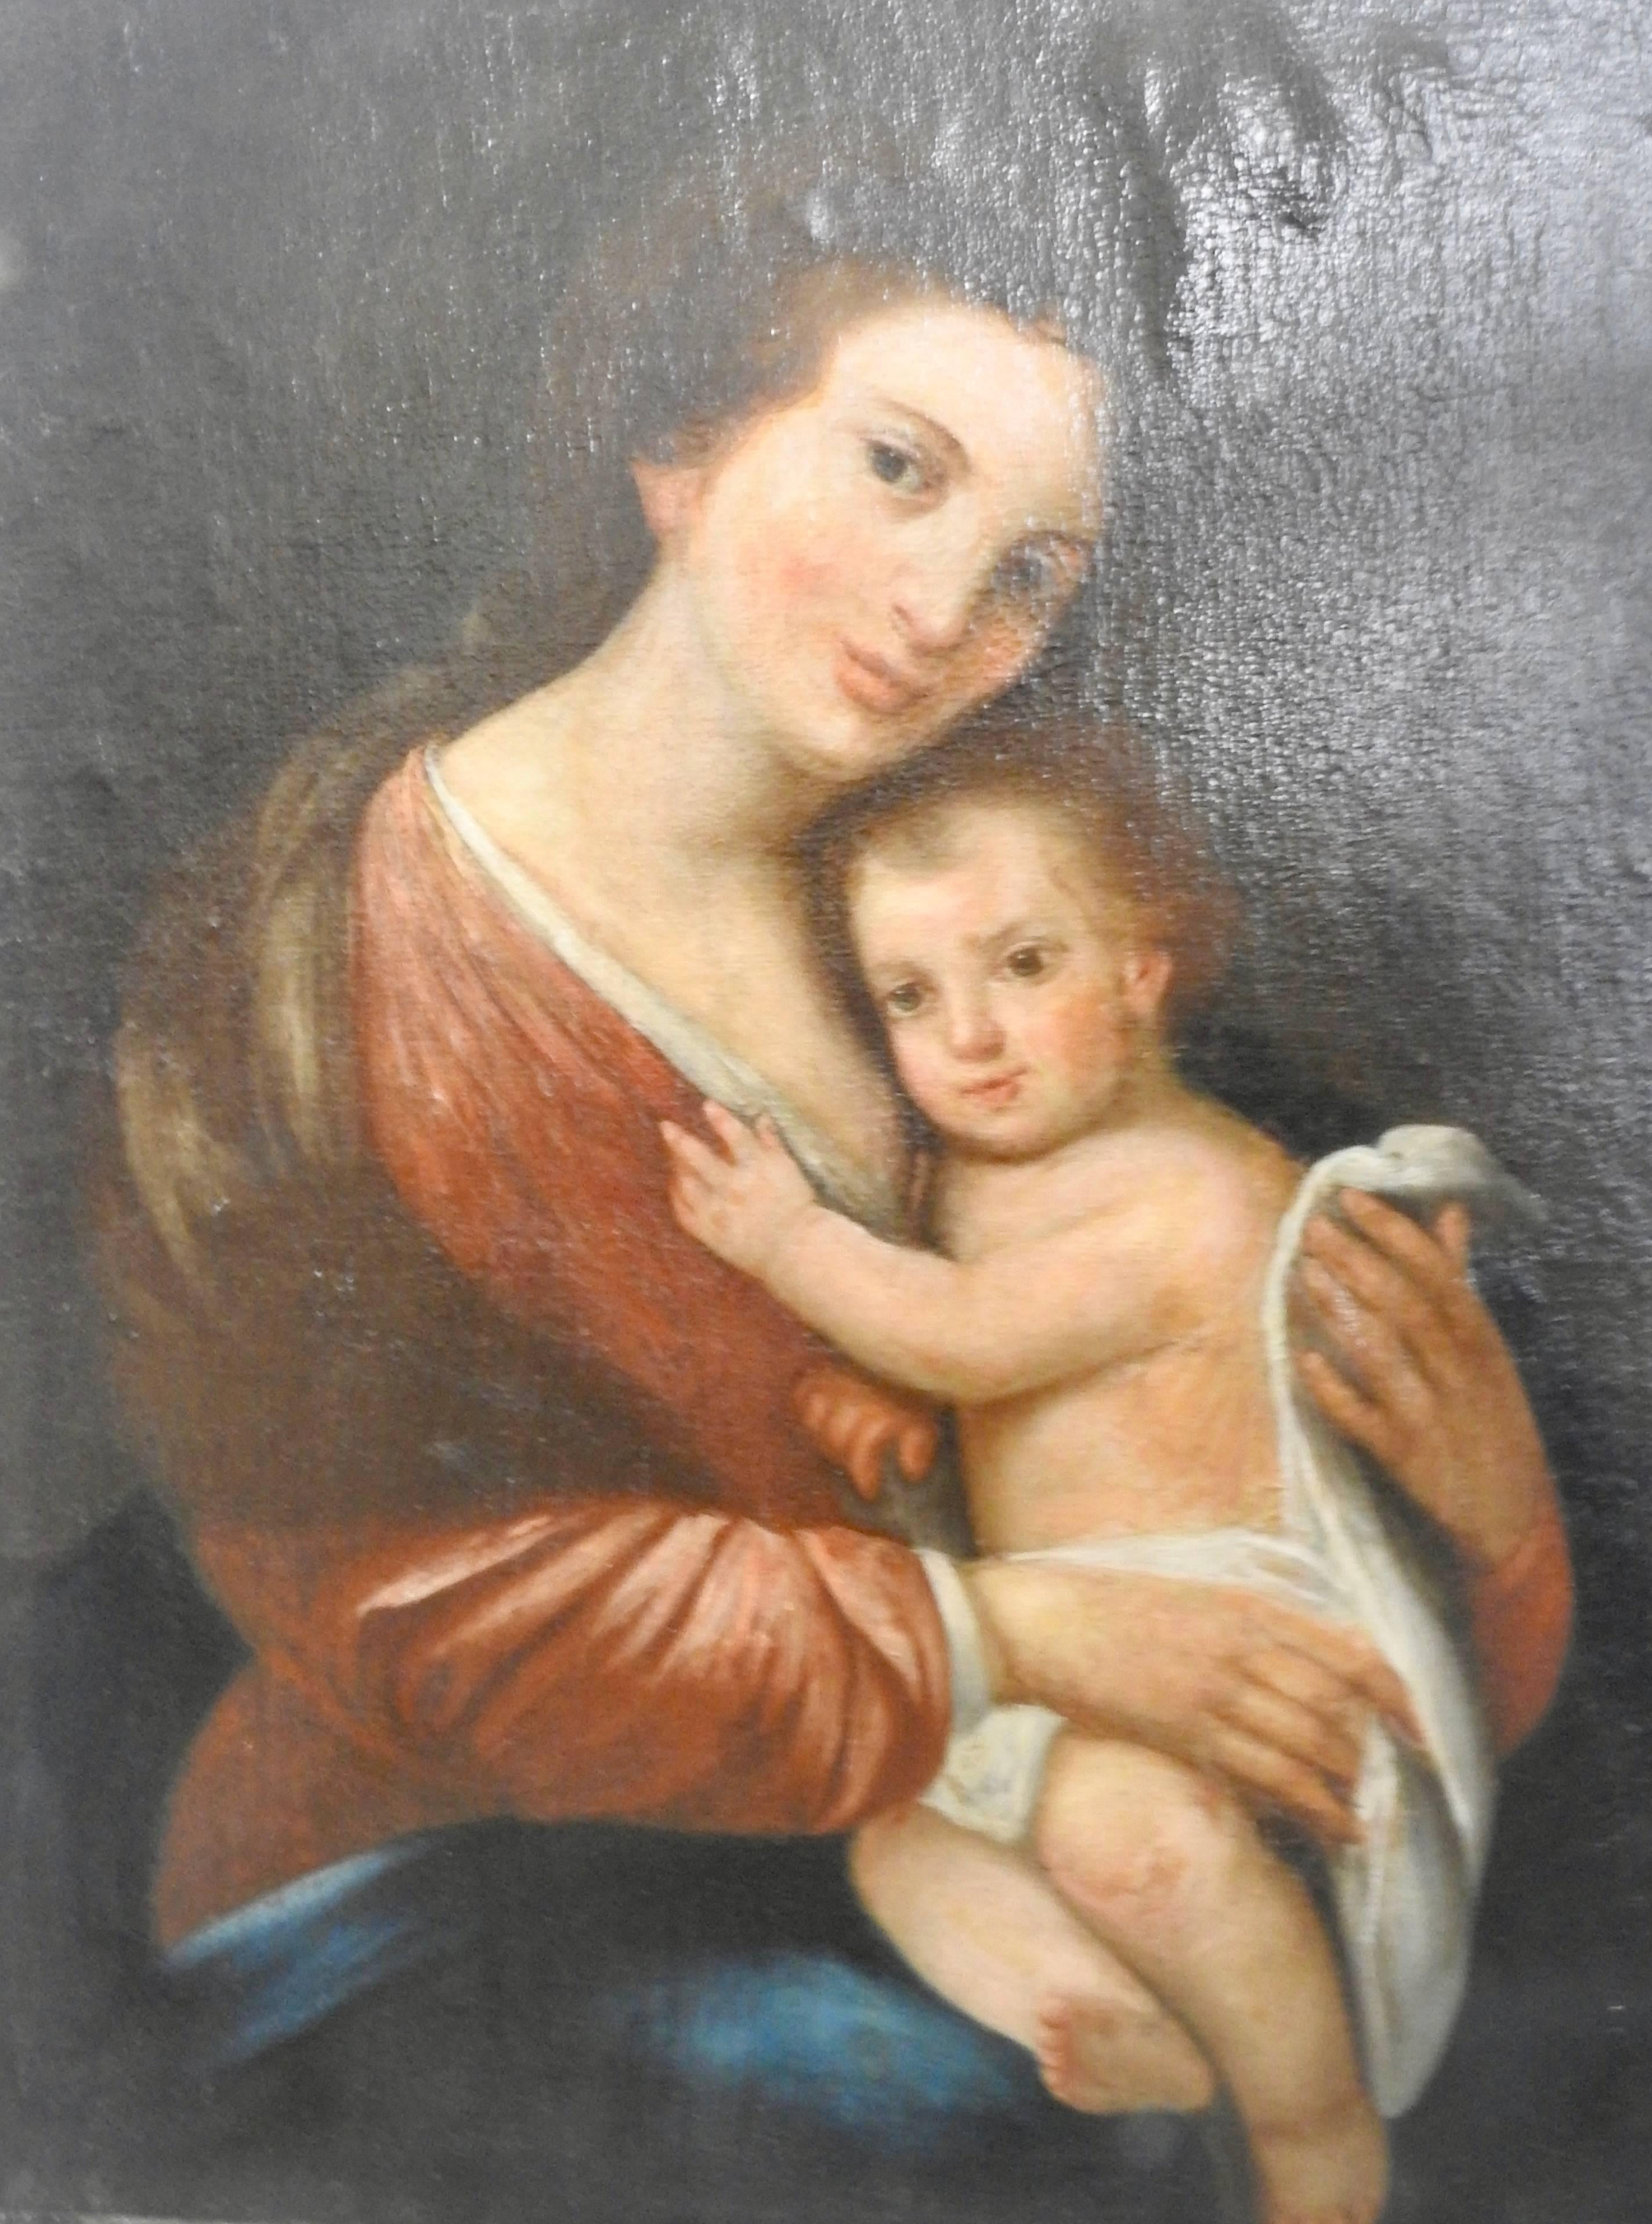 Madonna and child exquisitely painted on oil on canvas. The faces have wonderful details and the soft colors add to the beauty of this piece. Does not include a frame.